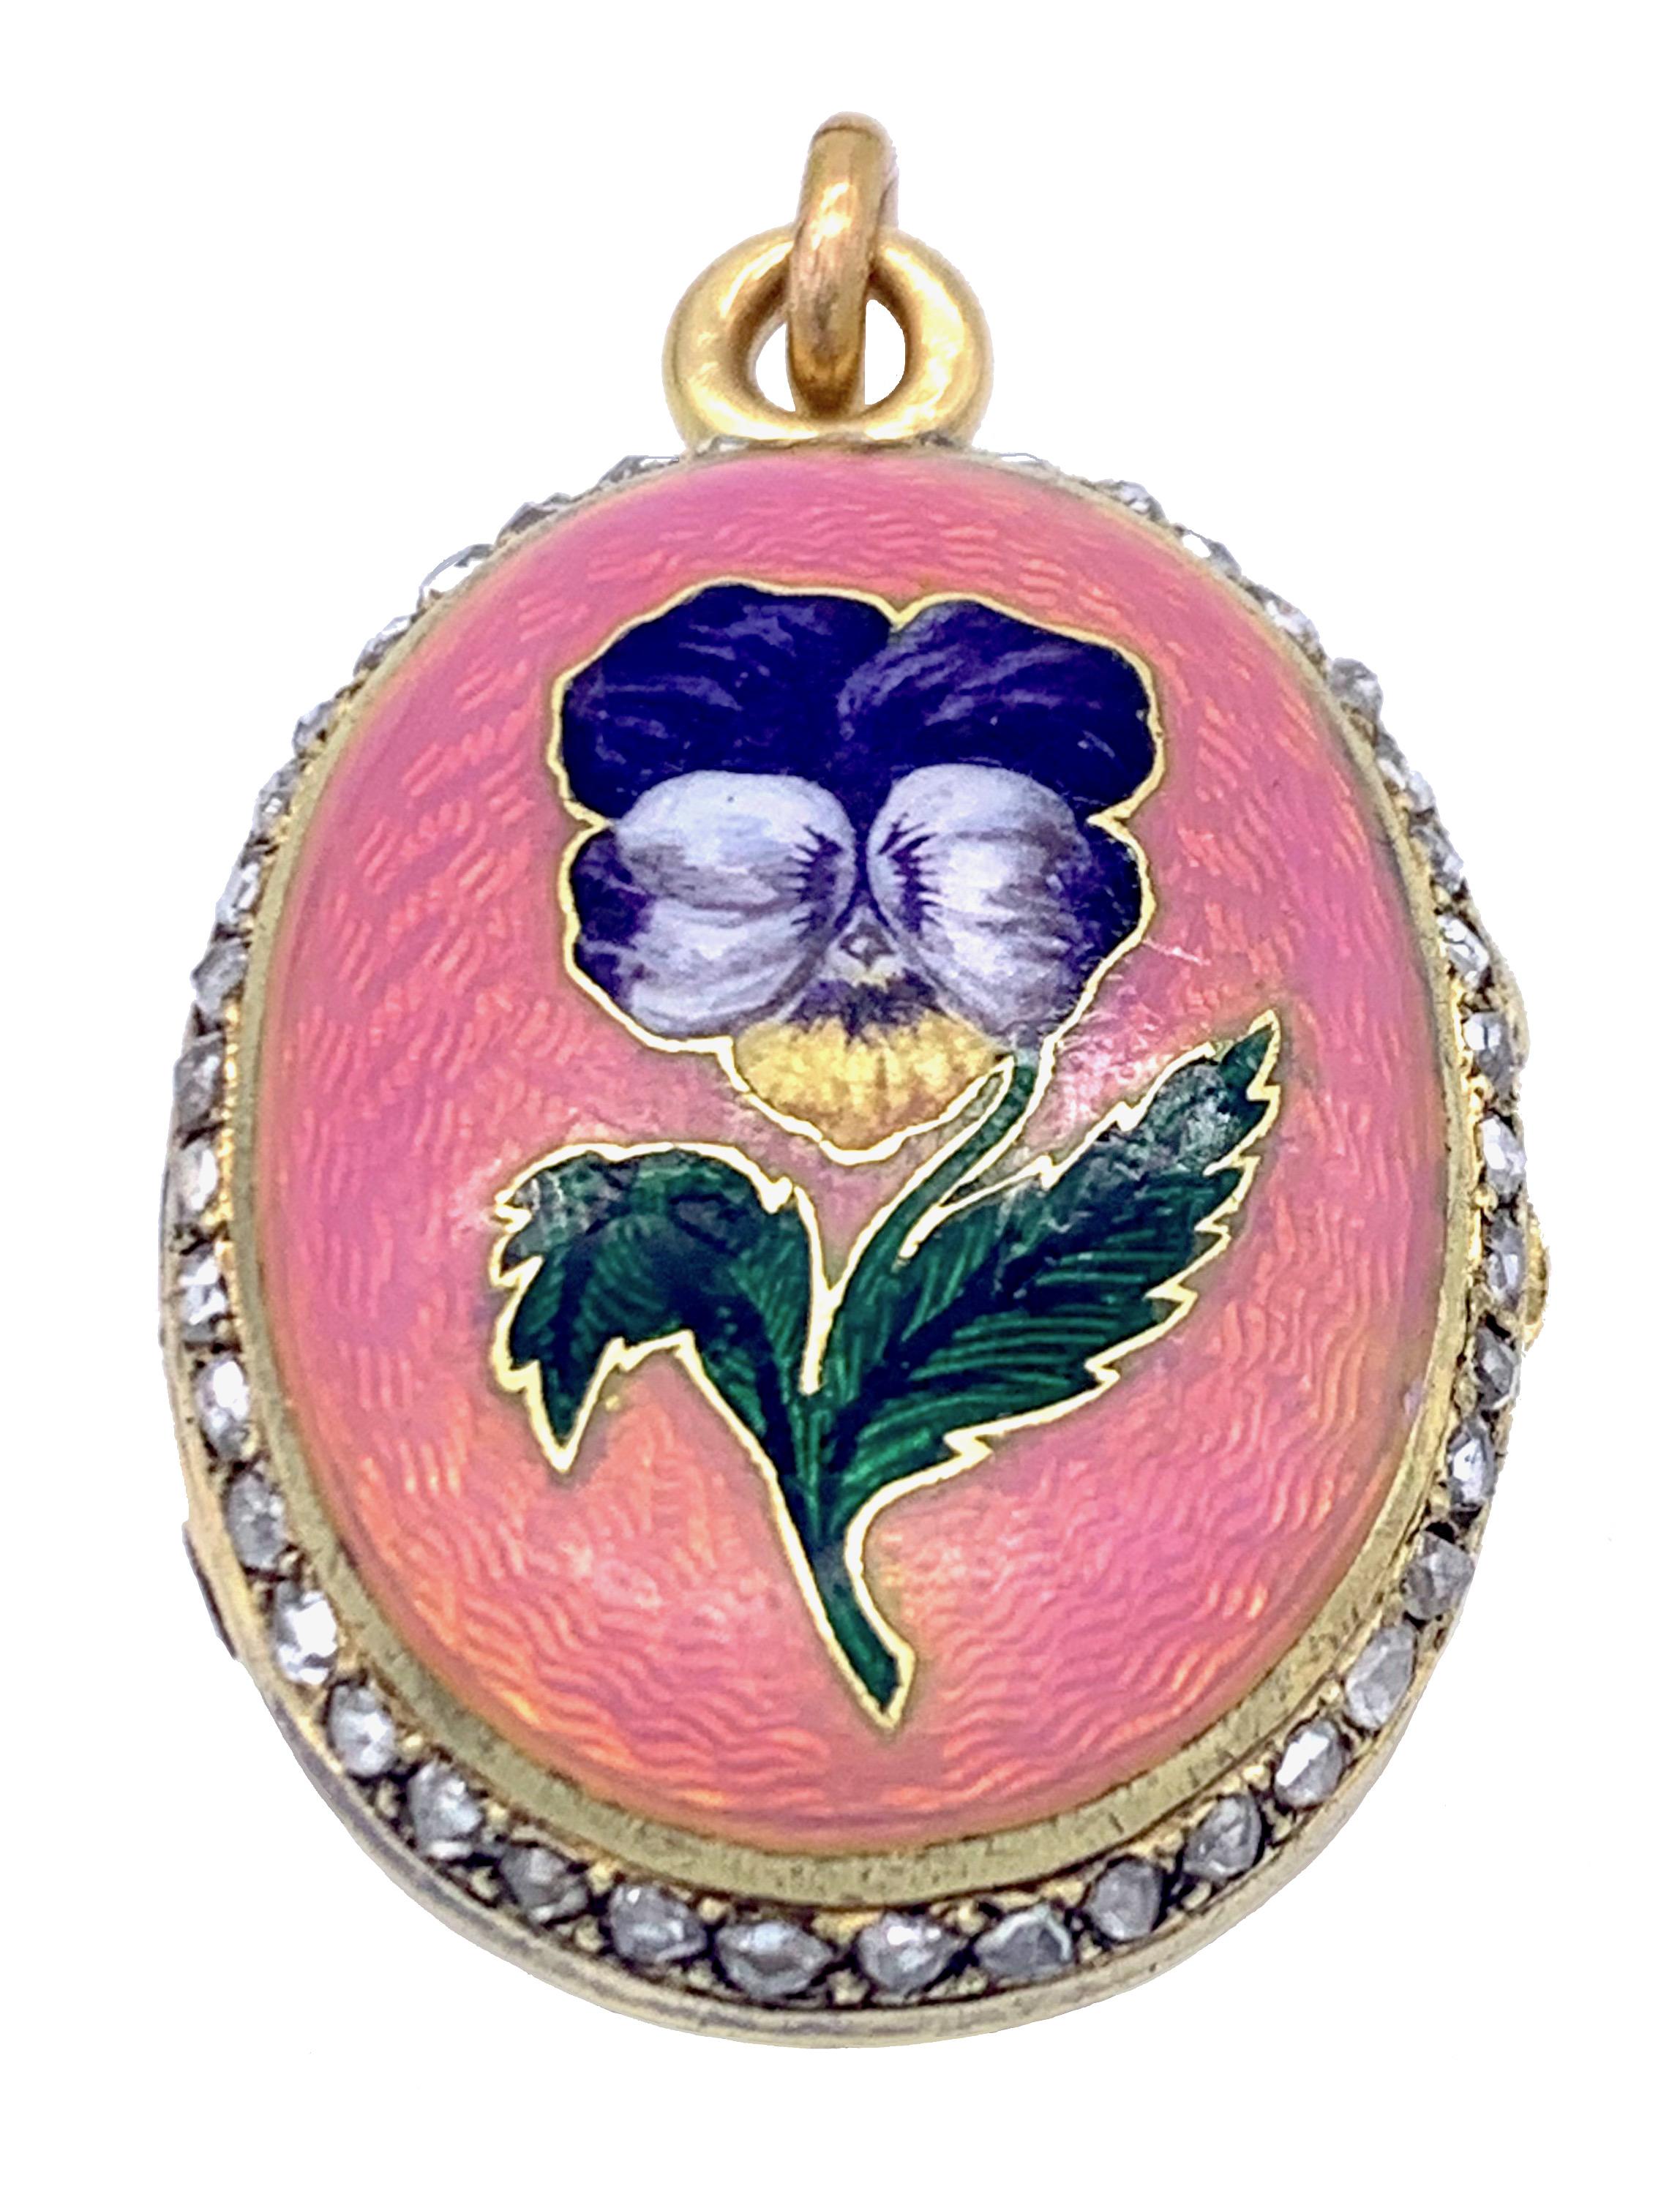 This marvellous vinaigrette pendant is decorated with breathtaking guilloché enamel in iridescent pink hues. It is decorated with a gold framed enamel painting of a pansy. The pansy stands for ' pensez à moi ' in romantic sign language. On the front